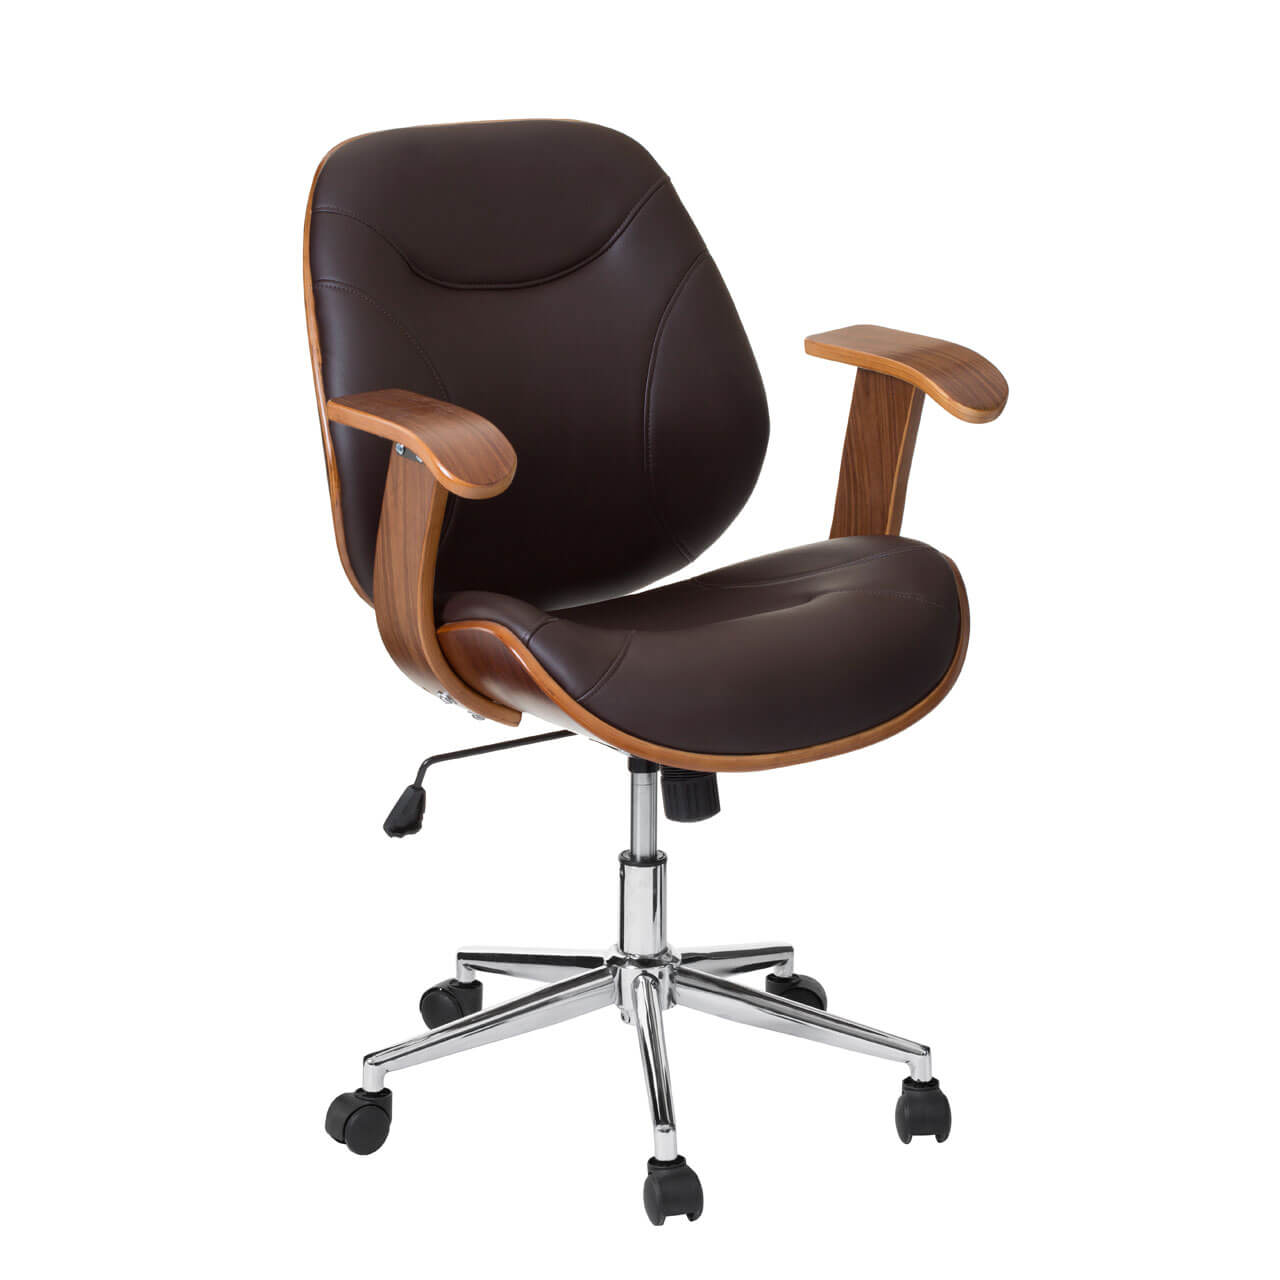 Office Chair With Arms Desk Chairs Fads, Dark Brown Leather Desk Chair No Wheels